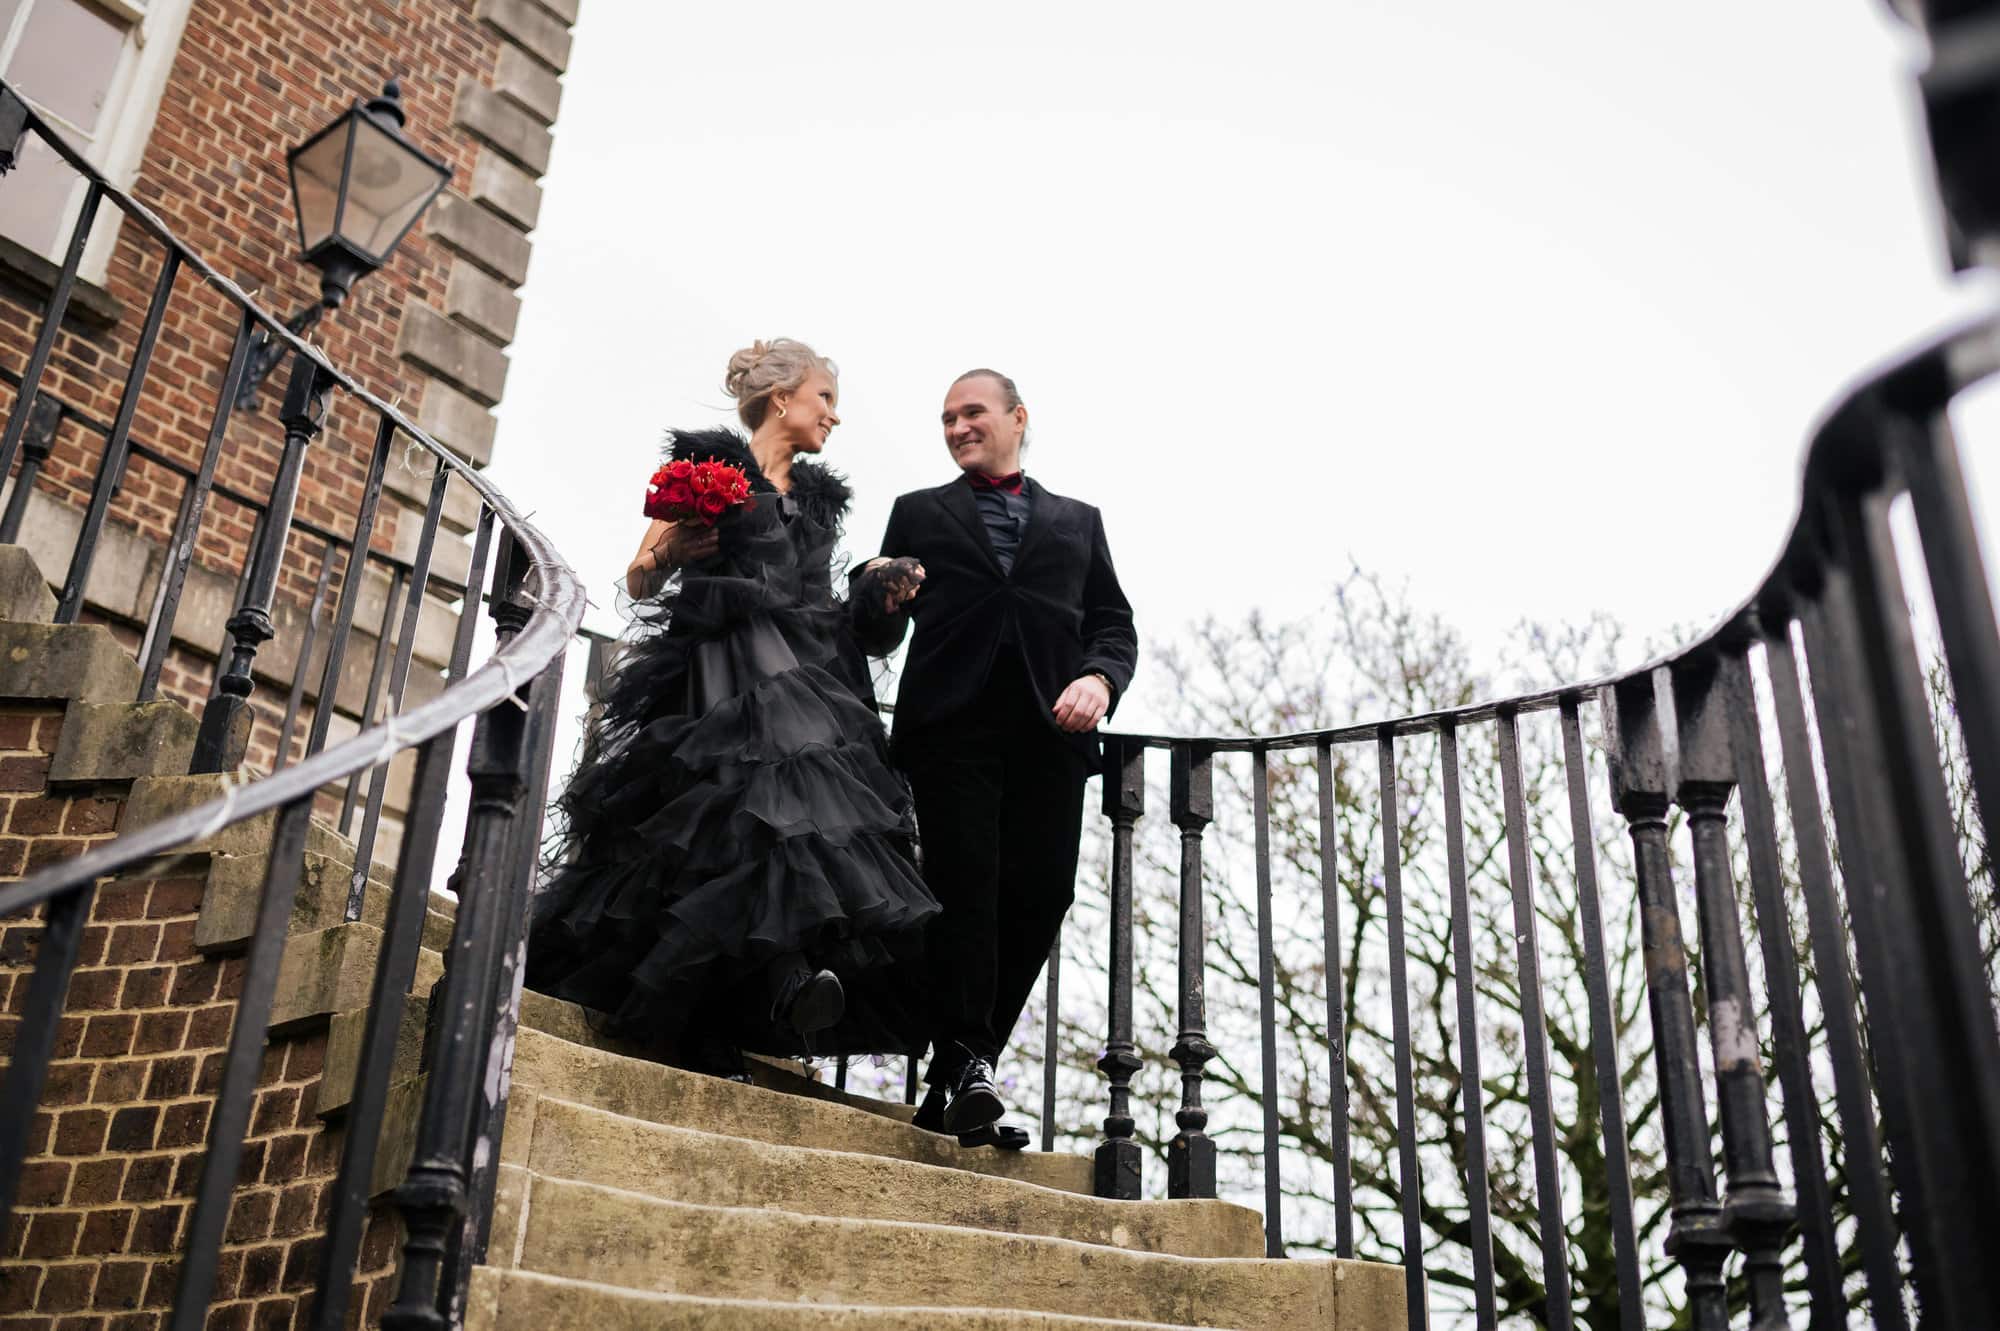 Black and red wedding at Poole Guildhall steps in Dorset